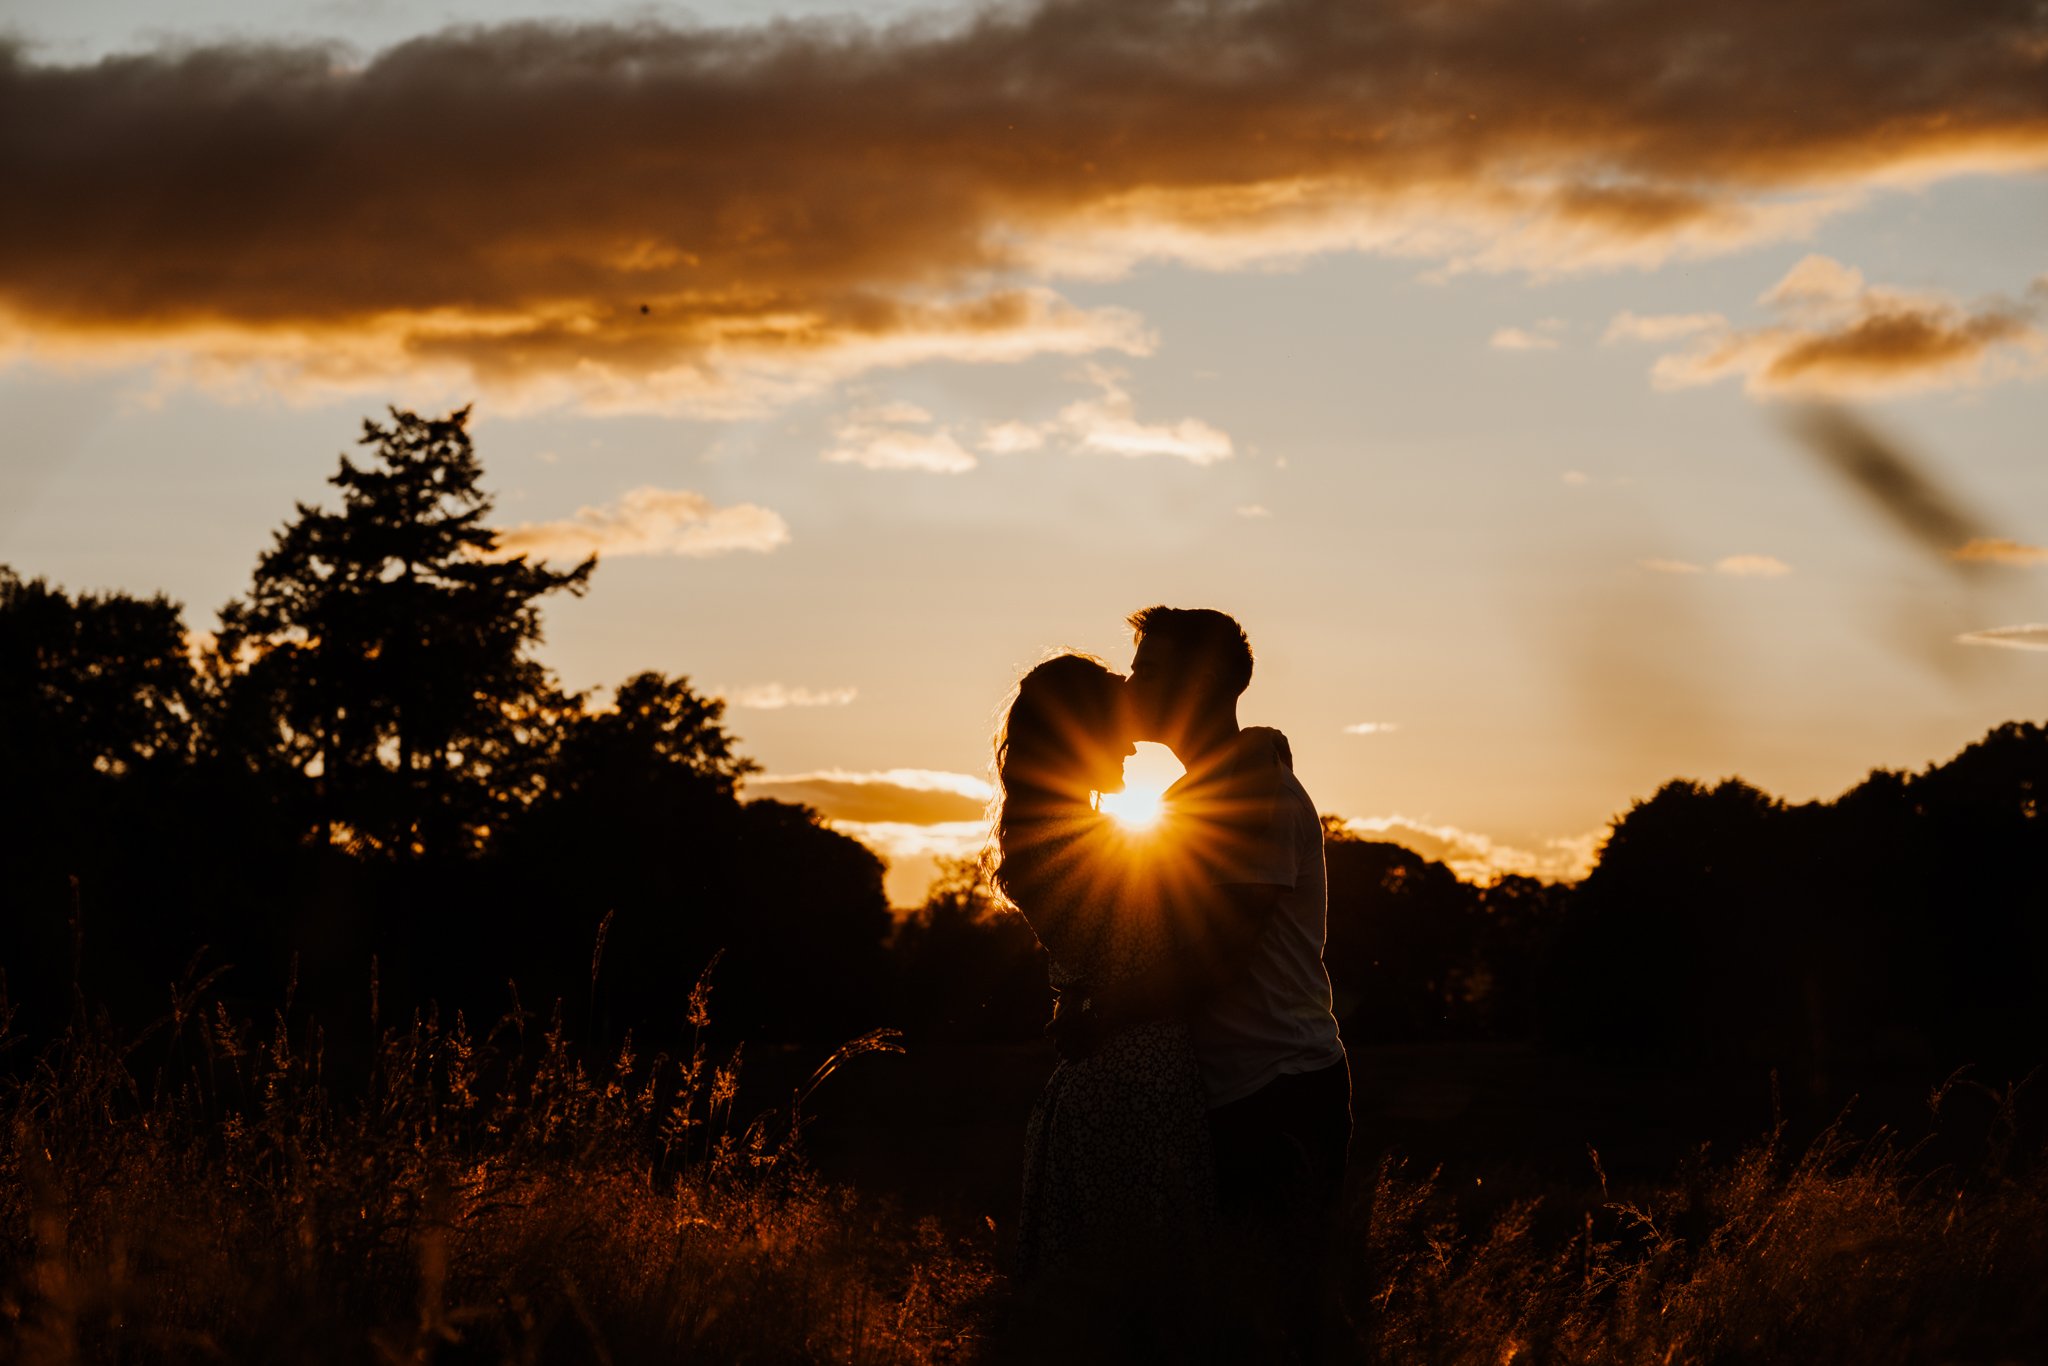 Angus Scotland Engagement and Wedding Photographer - Emily and Gabriel - Adventure Couple Session106.jpg